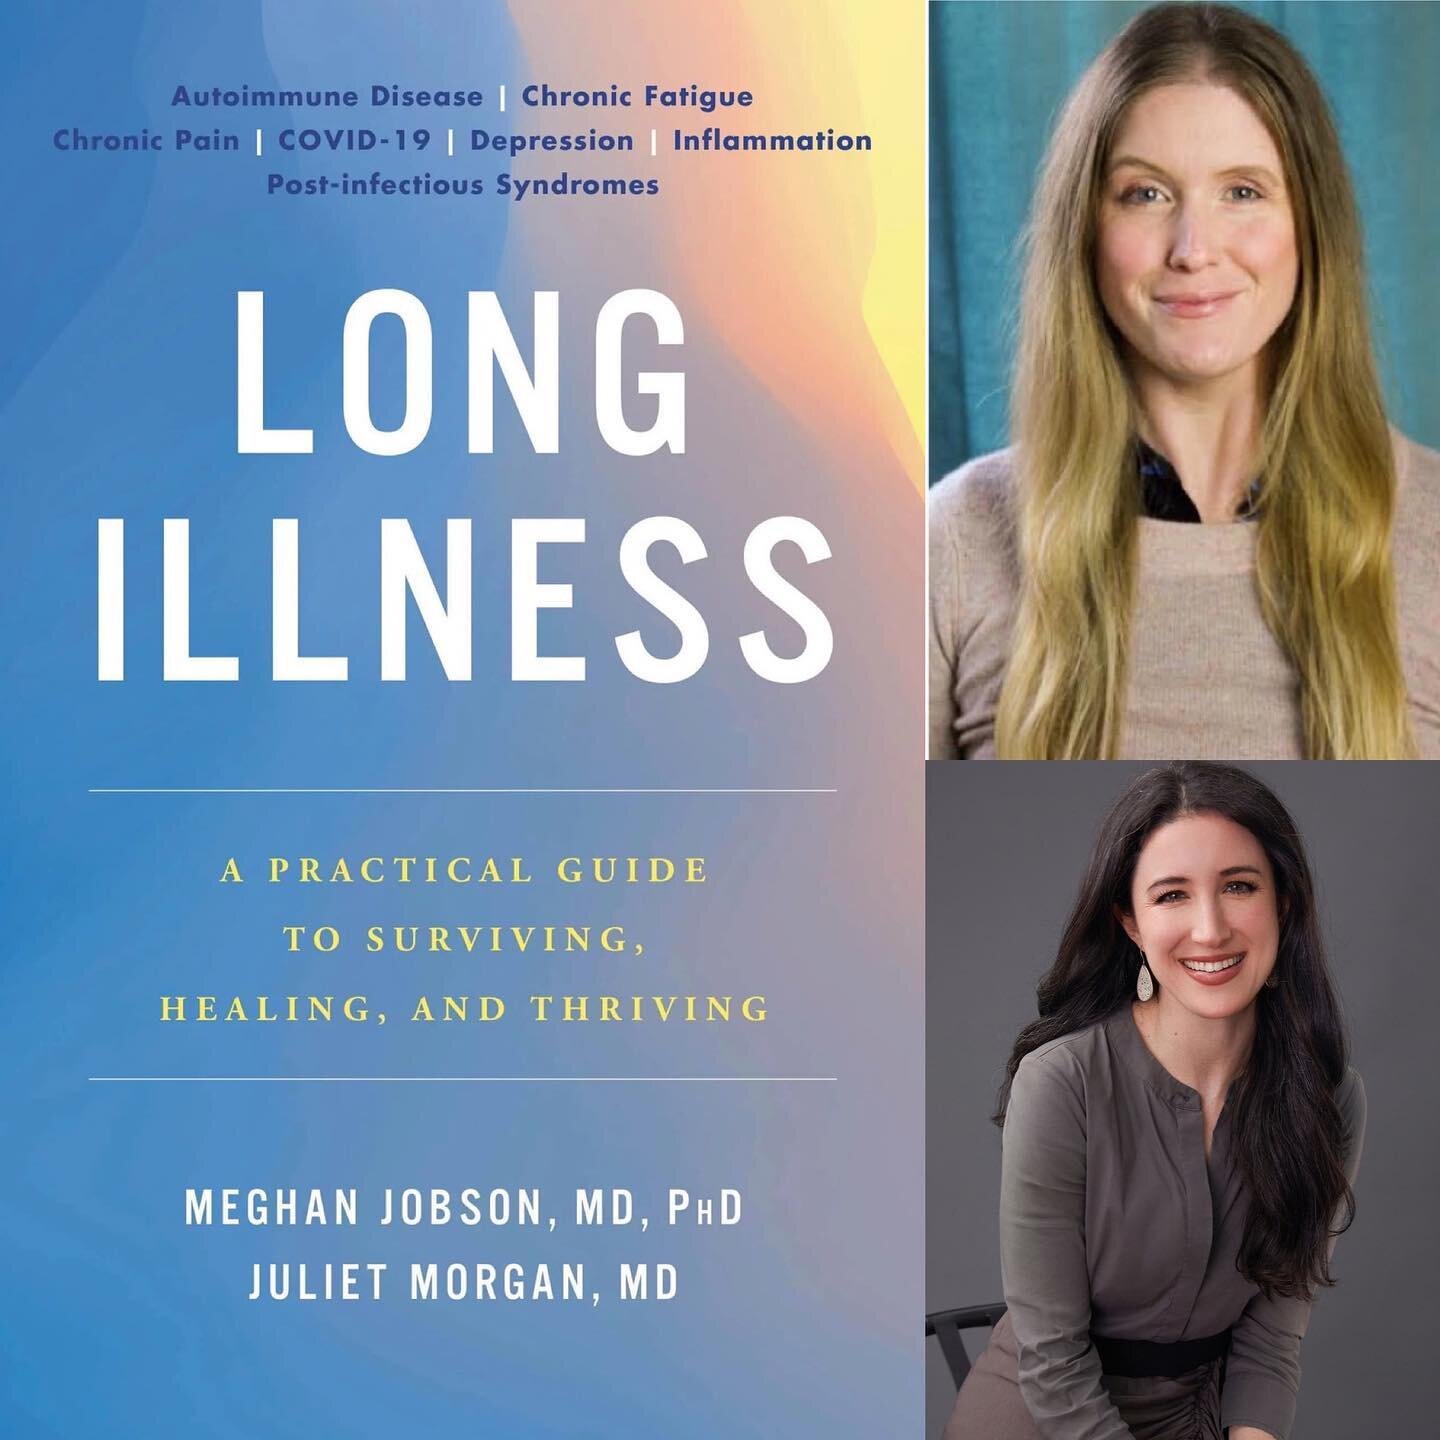 Have questions? Today we will be live on @reddit for an &ldquo;Ask Me Anything&rdquo; session from noon to 1:00 pacific. You can ask us anything!! We will also be sharing information from our new book, Long Illness. Join us! (See link in profile) Top